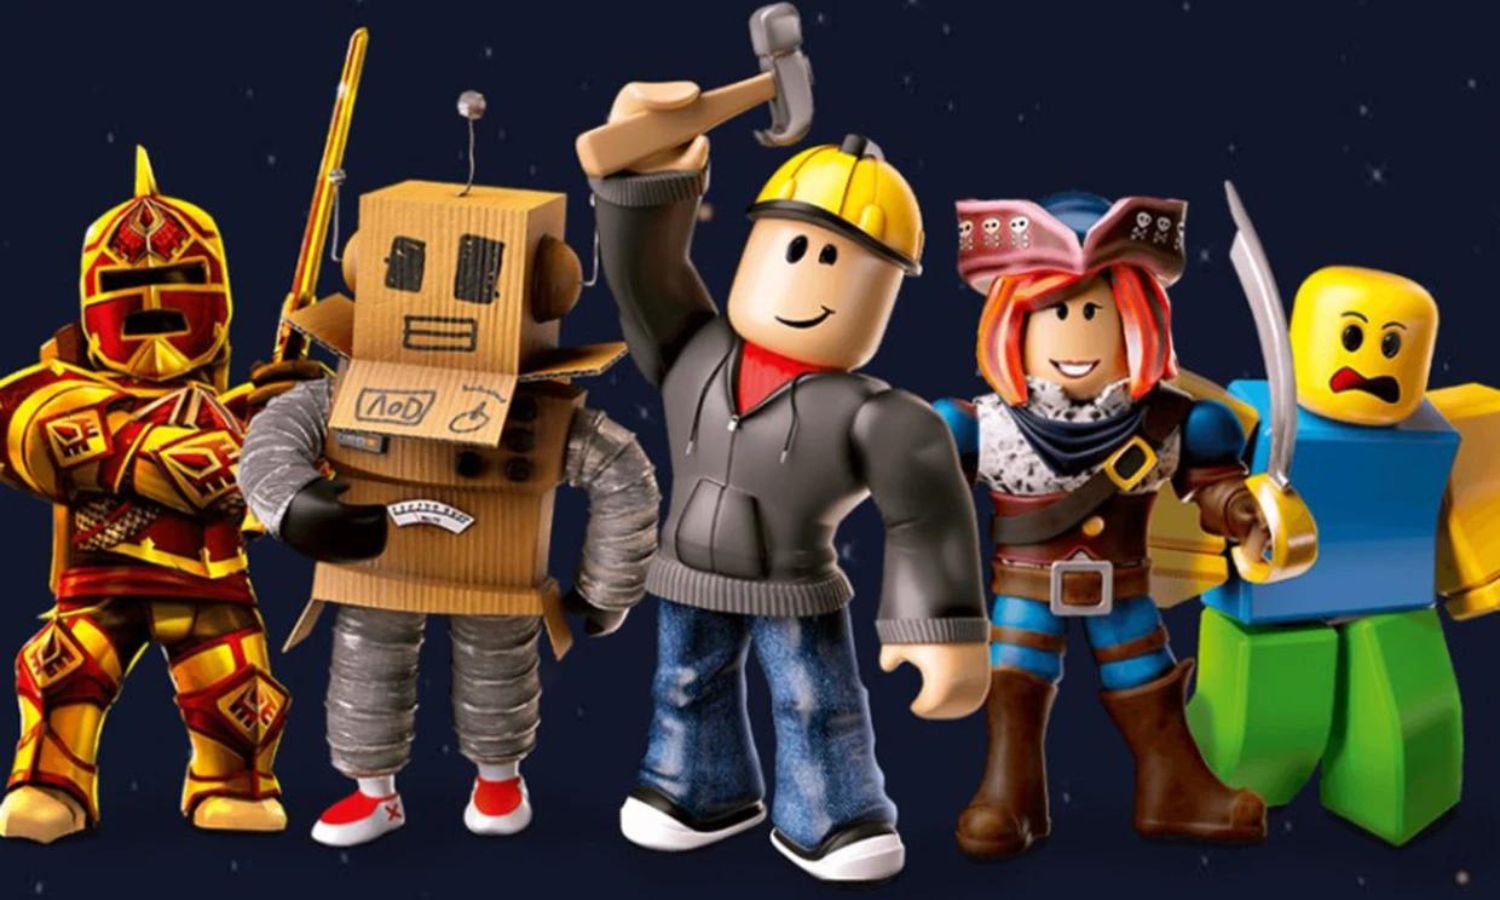 Is Roblox Down: Is The Popular Gaming Platform Experiencing Server